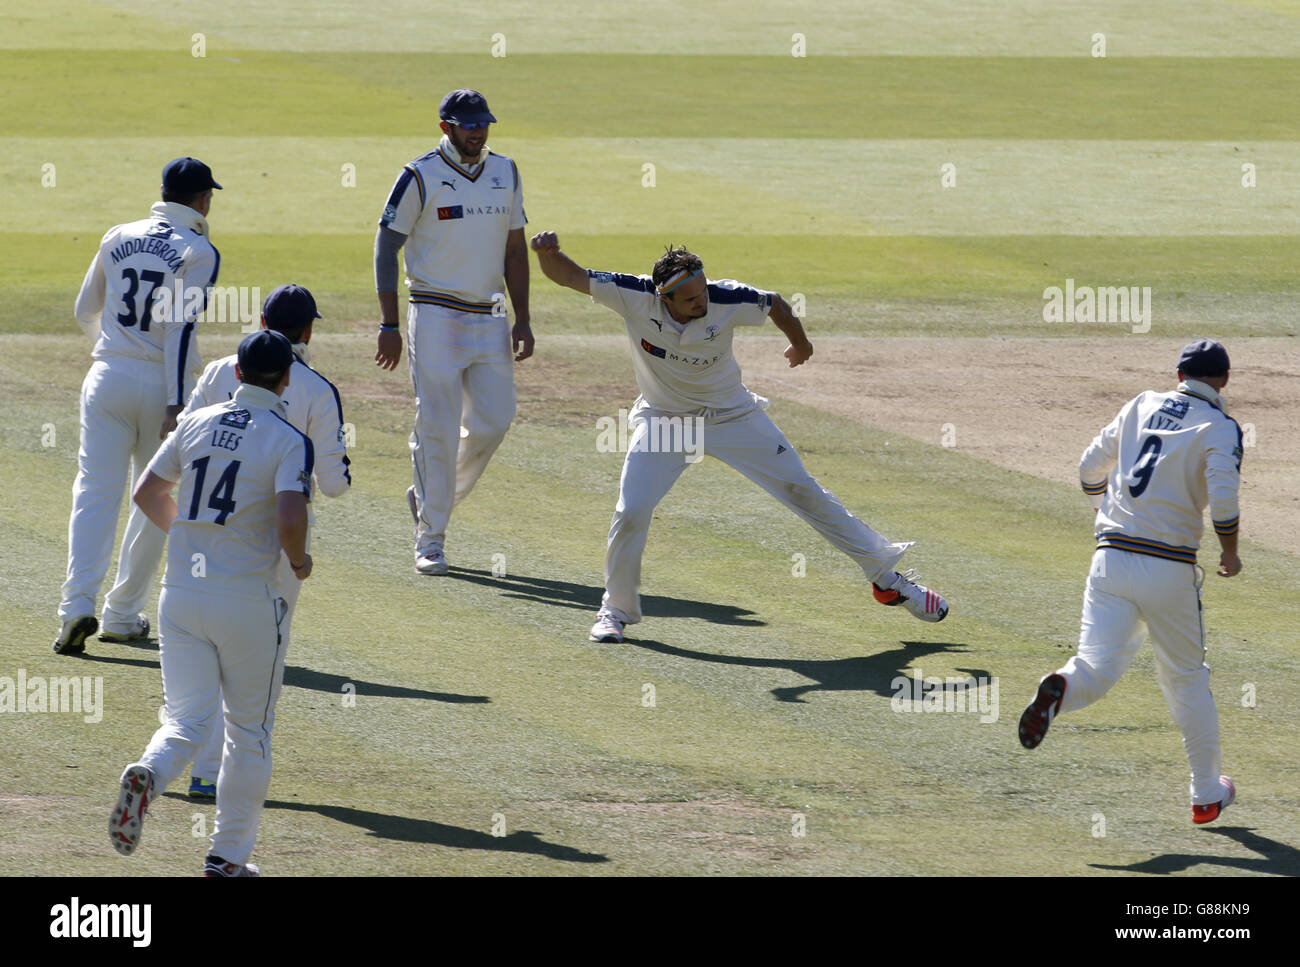 Yorkshire's Jack Brooks (second right) celebrates catching and bowling Middlesex's Neil Dexter for 13 runs during day two of the LV= County Championship Division One match at Lord's Cricket Ground, London. Picture date: Thursday September 10, 2015. See PA story CRICKET Middlesex. Photo credit should read: Jed Leicester/PA Wire. RESTRICTIONS: . No commercial use without prior written consent of the ECB. Still image use only - no moving images to emulate broadcast. No removing or obscuring of sponsor logos. Call +44 (0)1158 447447 for further information. Stock Photo